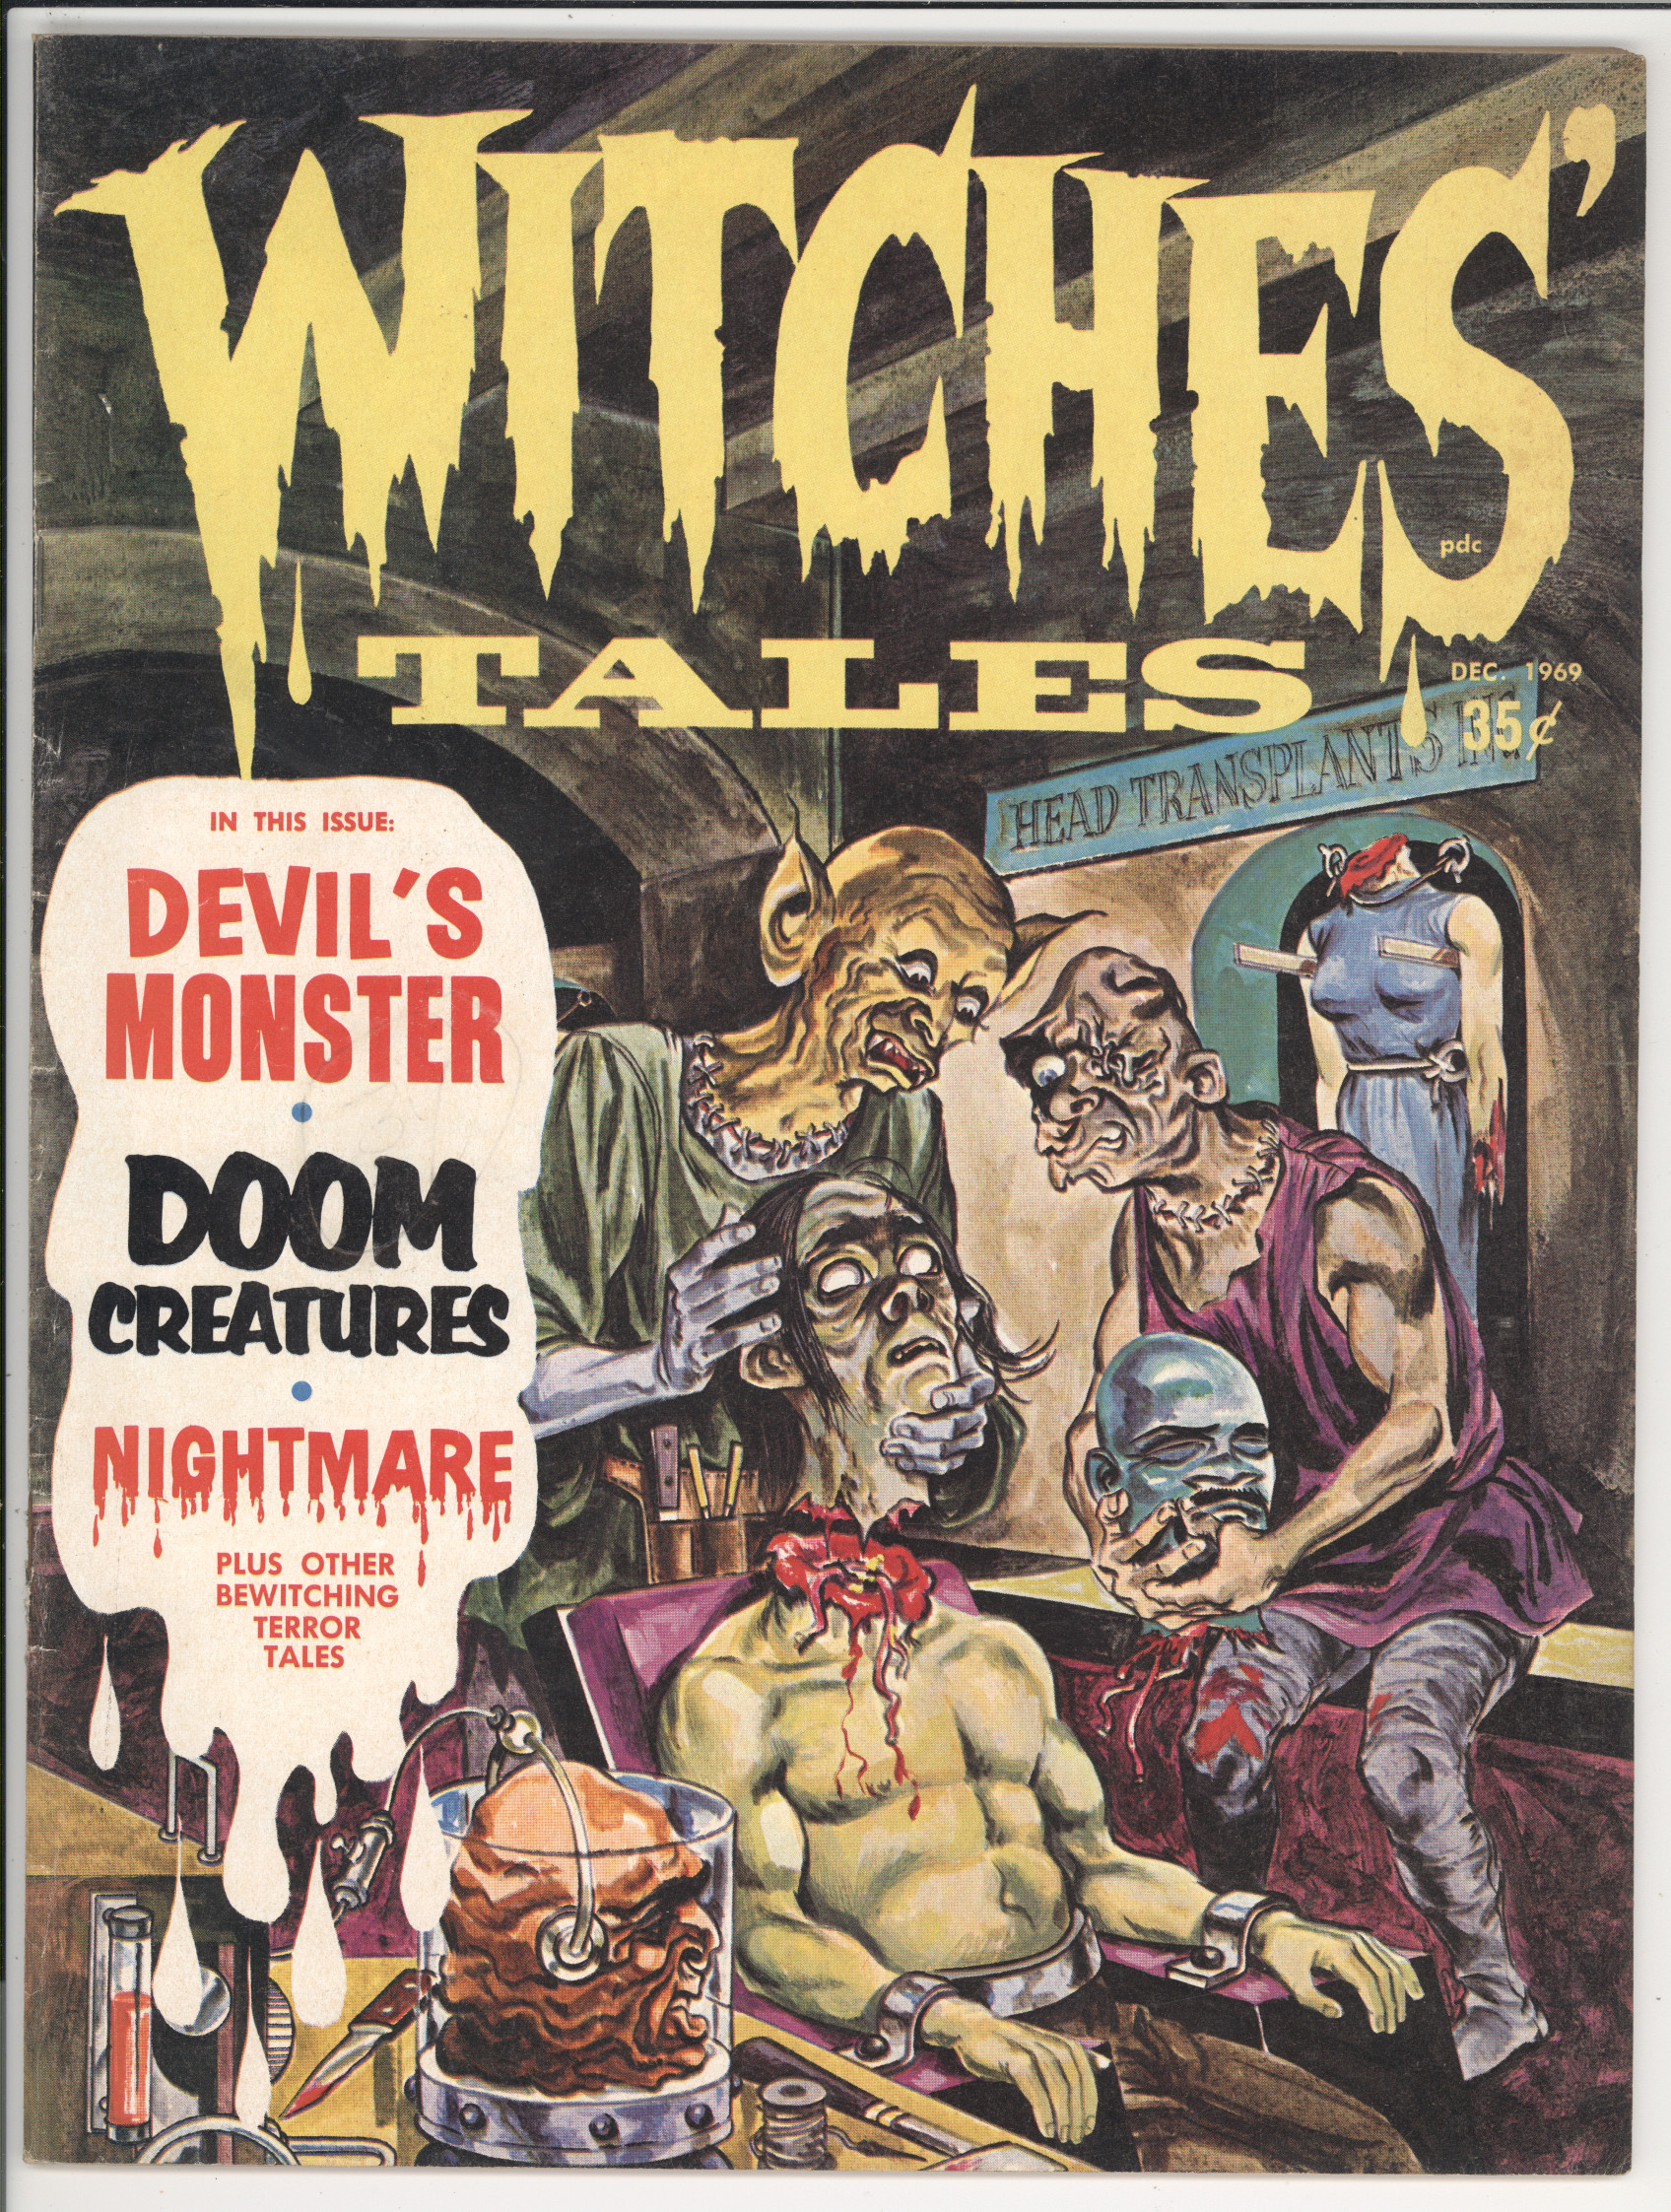 Witches Tales #V1#9